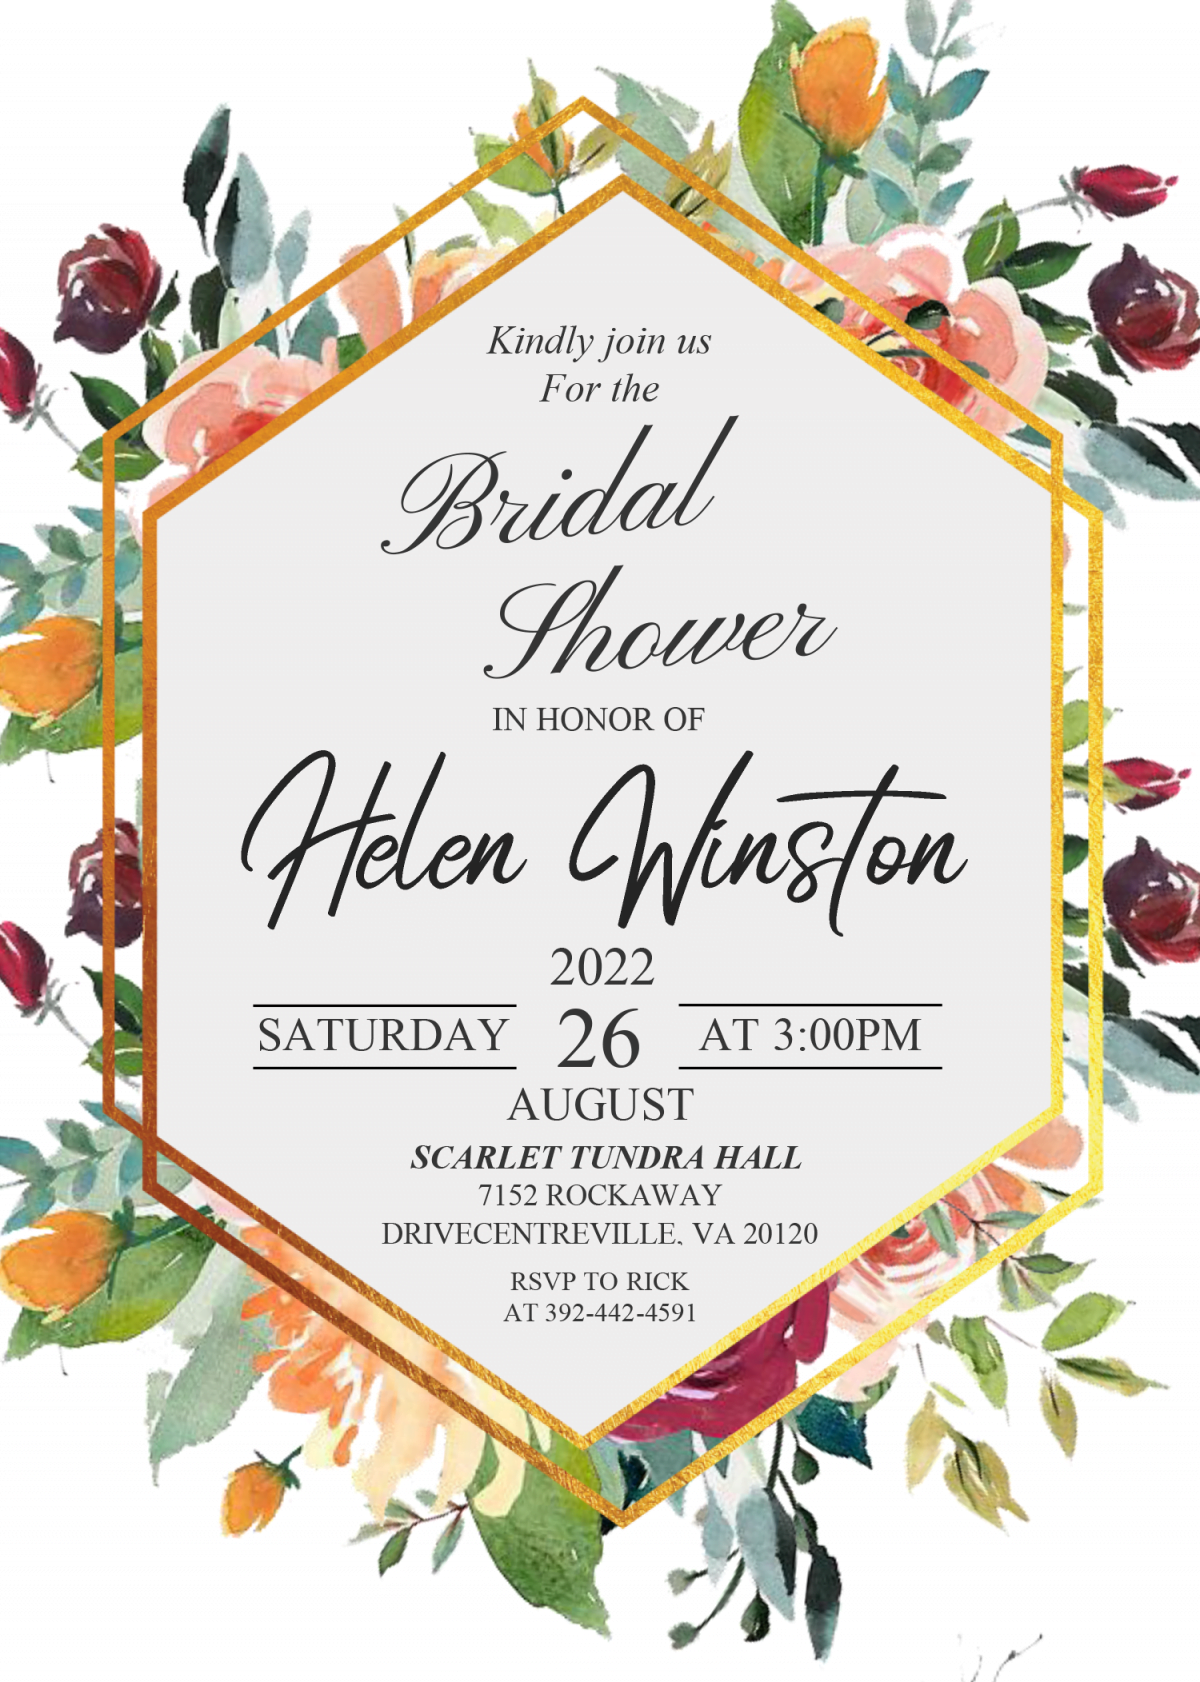 Modern Floral Invitation Templates - Editable .DOCX and has watercolor floral painting